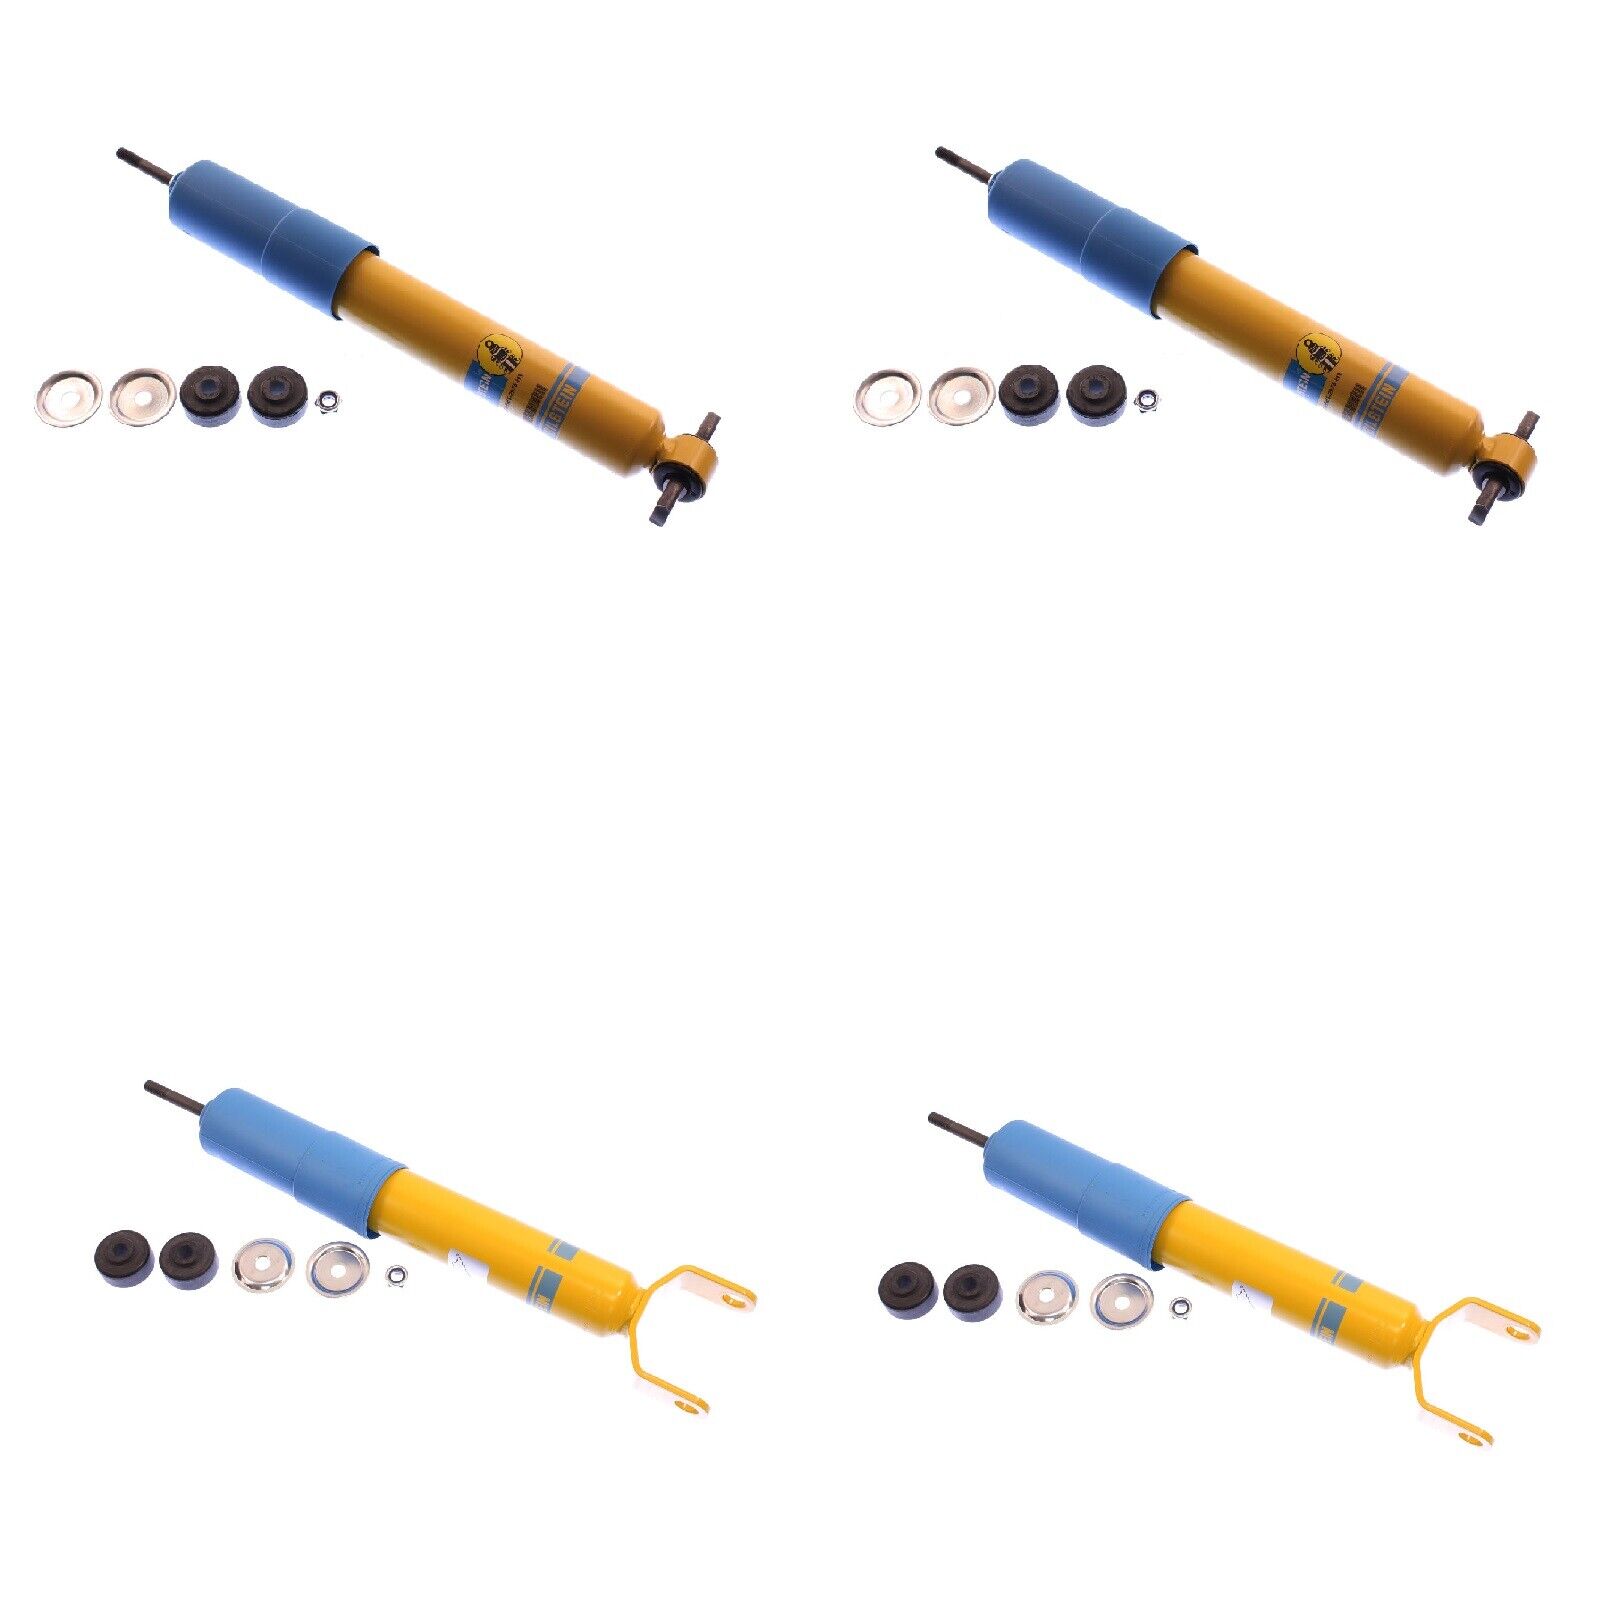 Bilstein B6 Performance Front & Rear Shock Absorbers for 97-13 Chevy Corvette